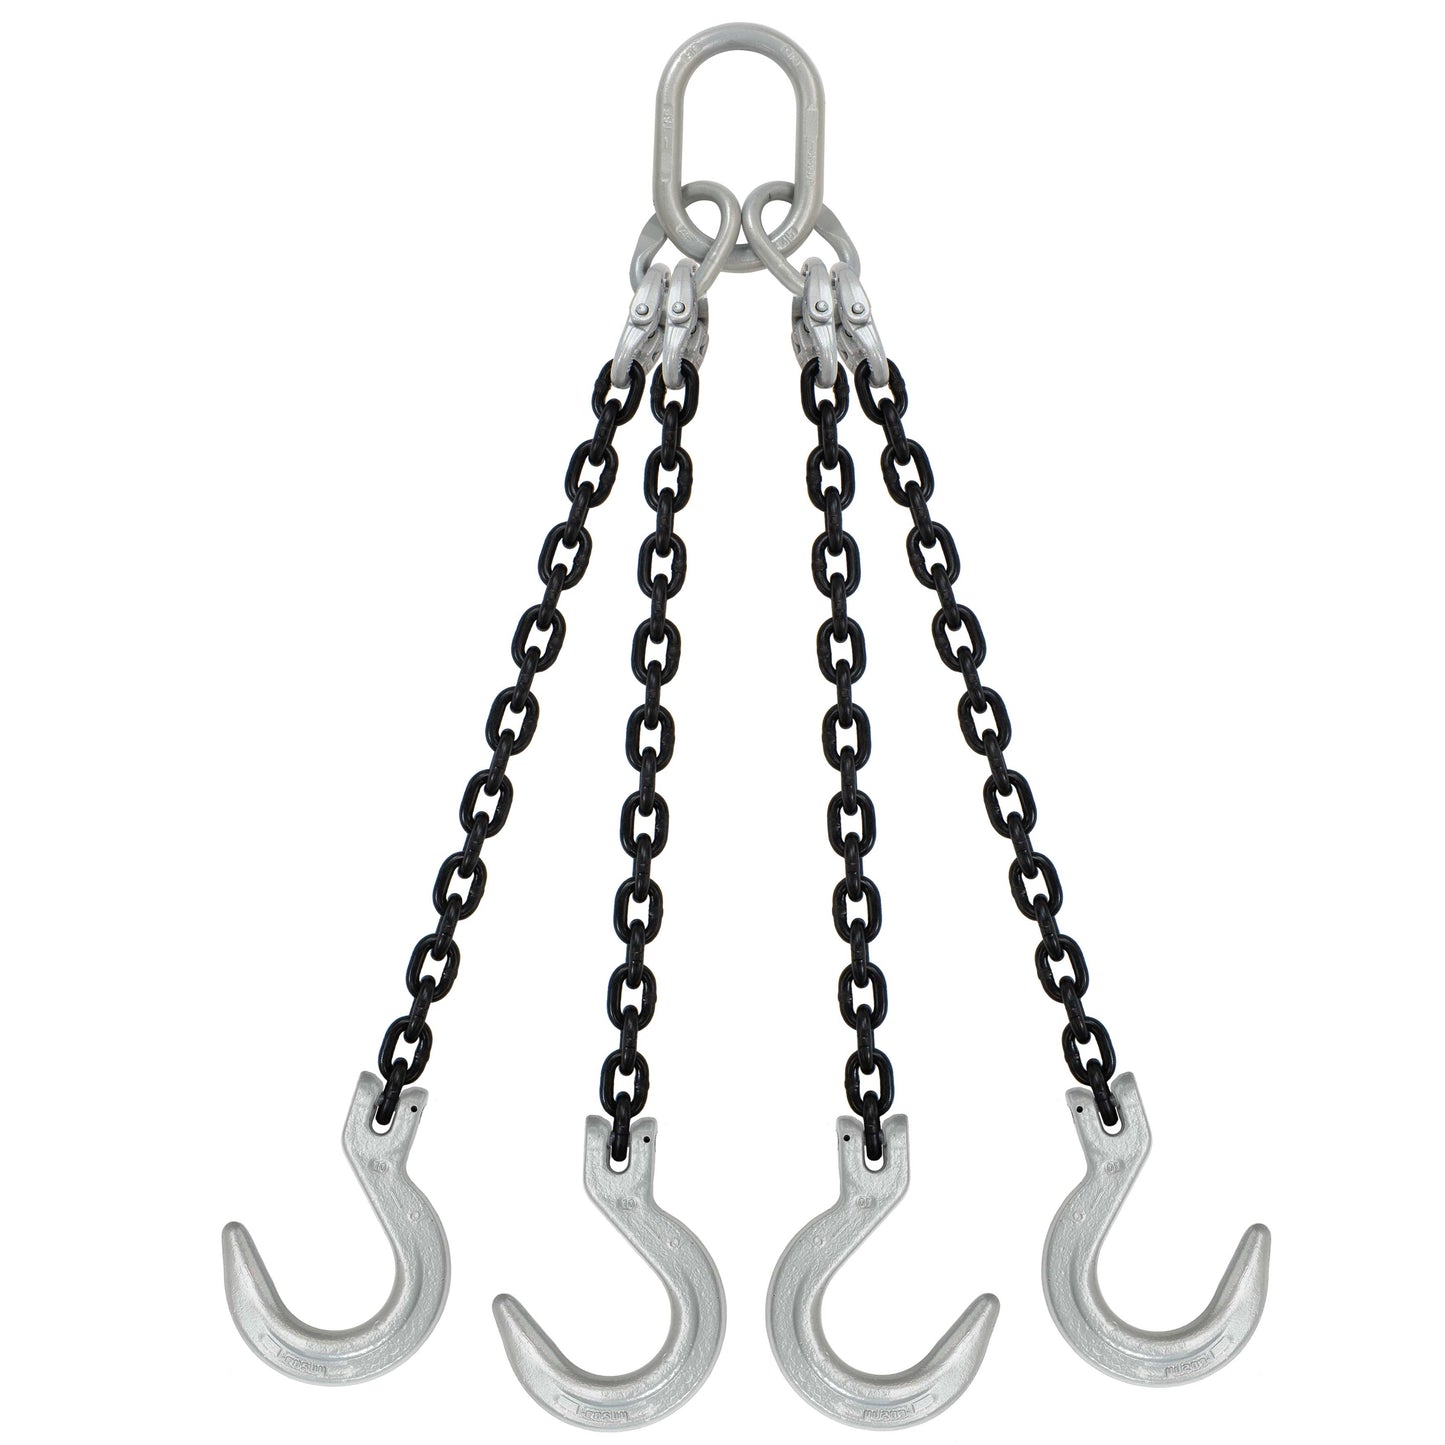 932 inch x 12 foot Domestic 4 Leg Chain Sling w Crosby Foundry Hooks Grade 100 image 1 of 2